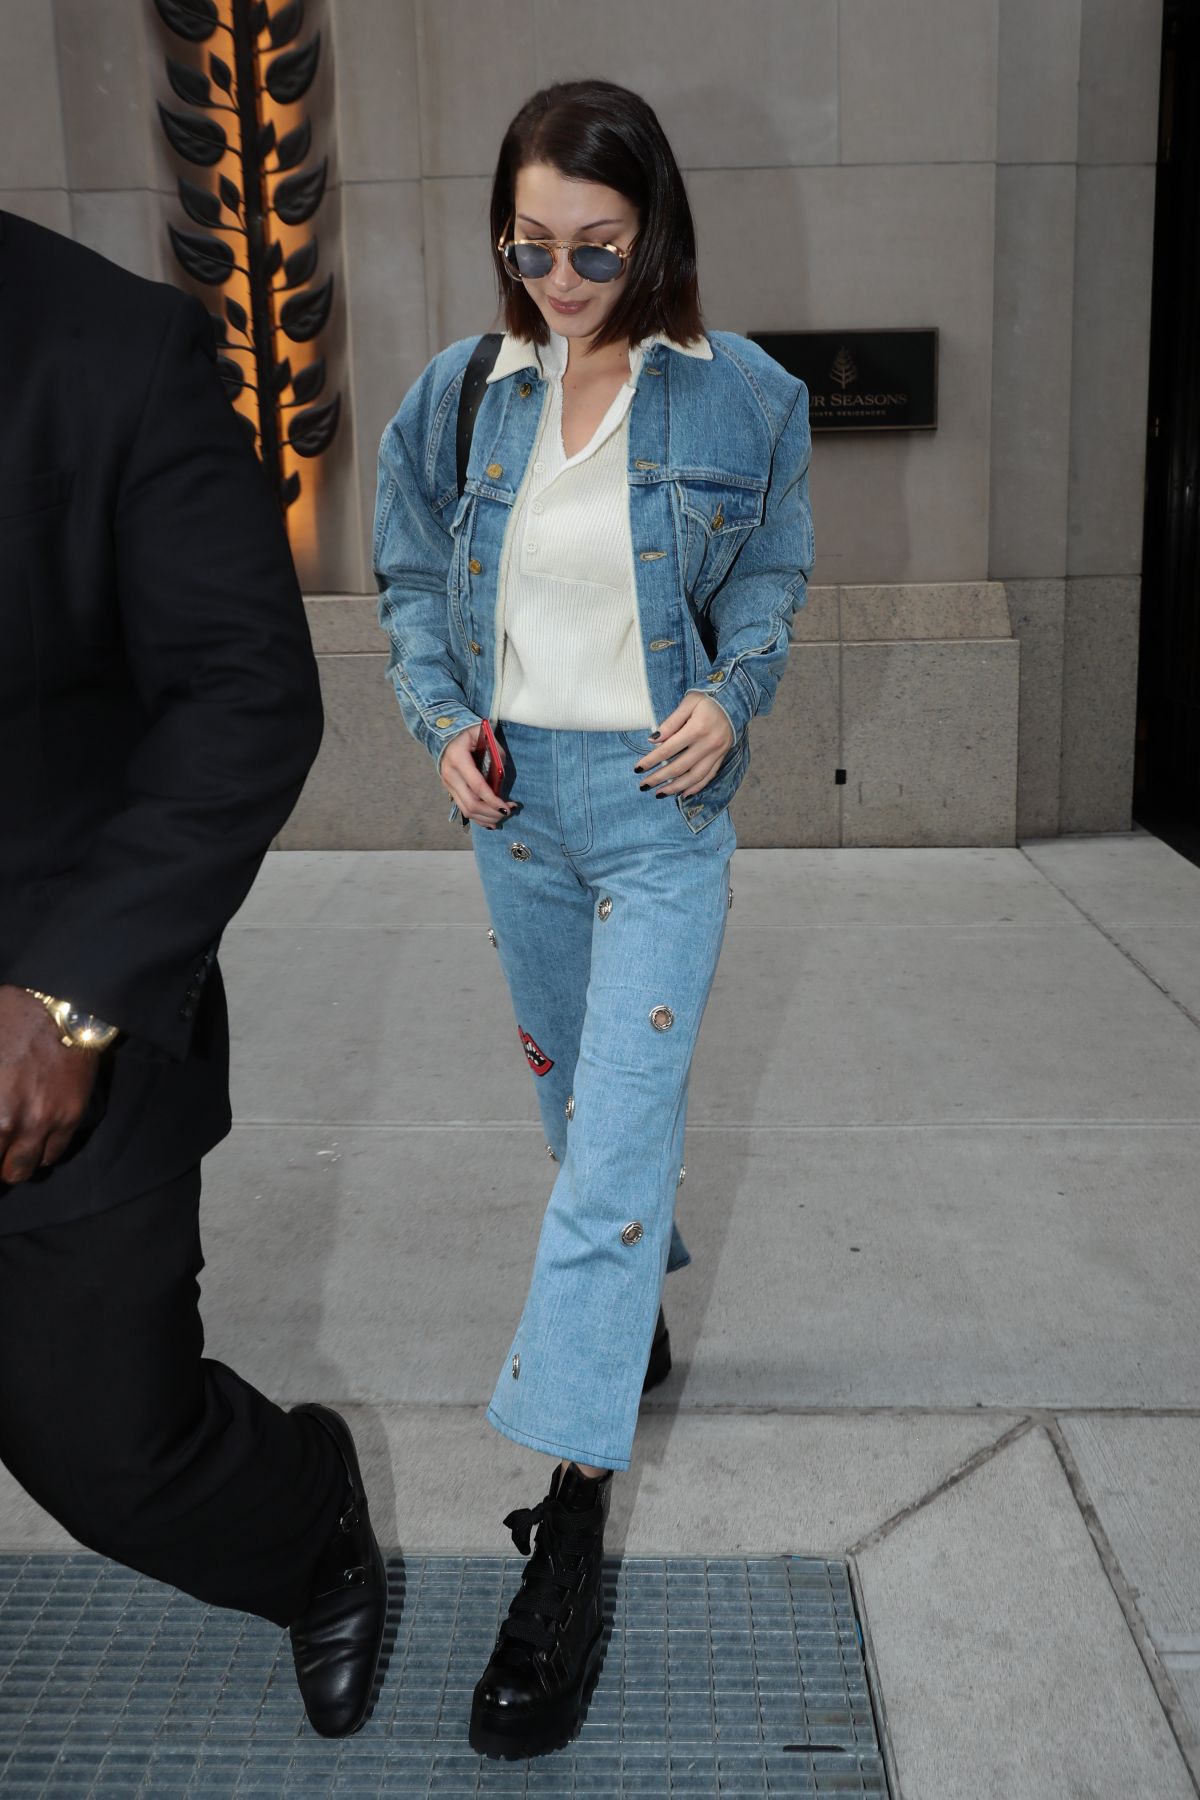 BELLA HADID in Denim Out and About in New York 11/14/2017 – HawtCelebs